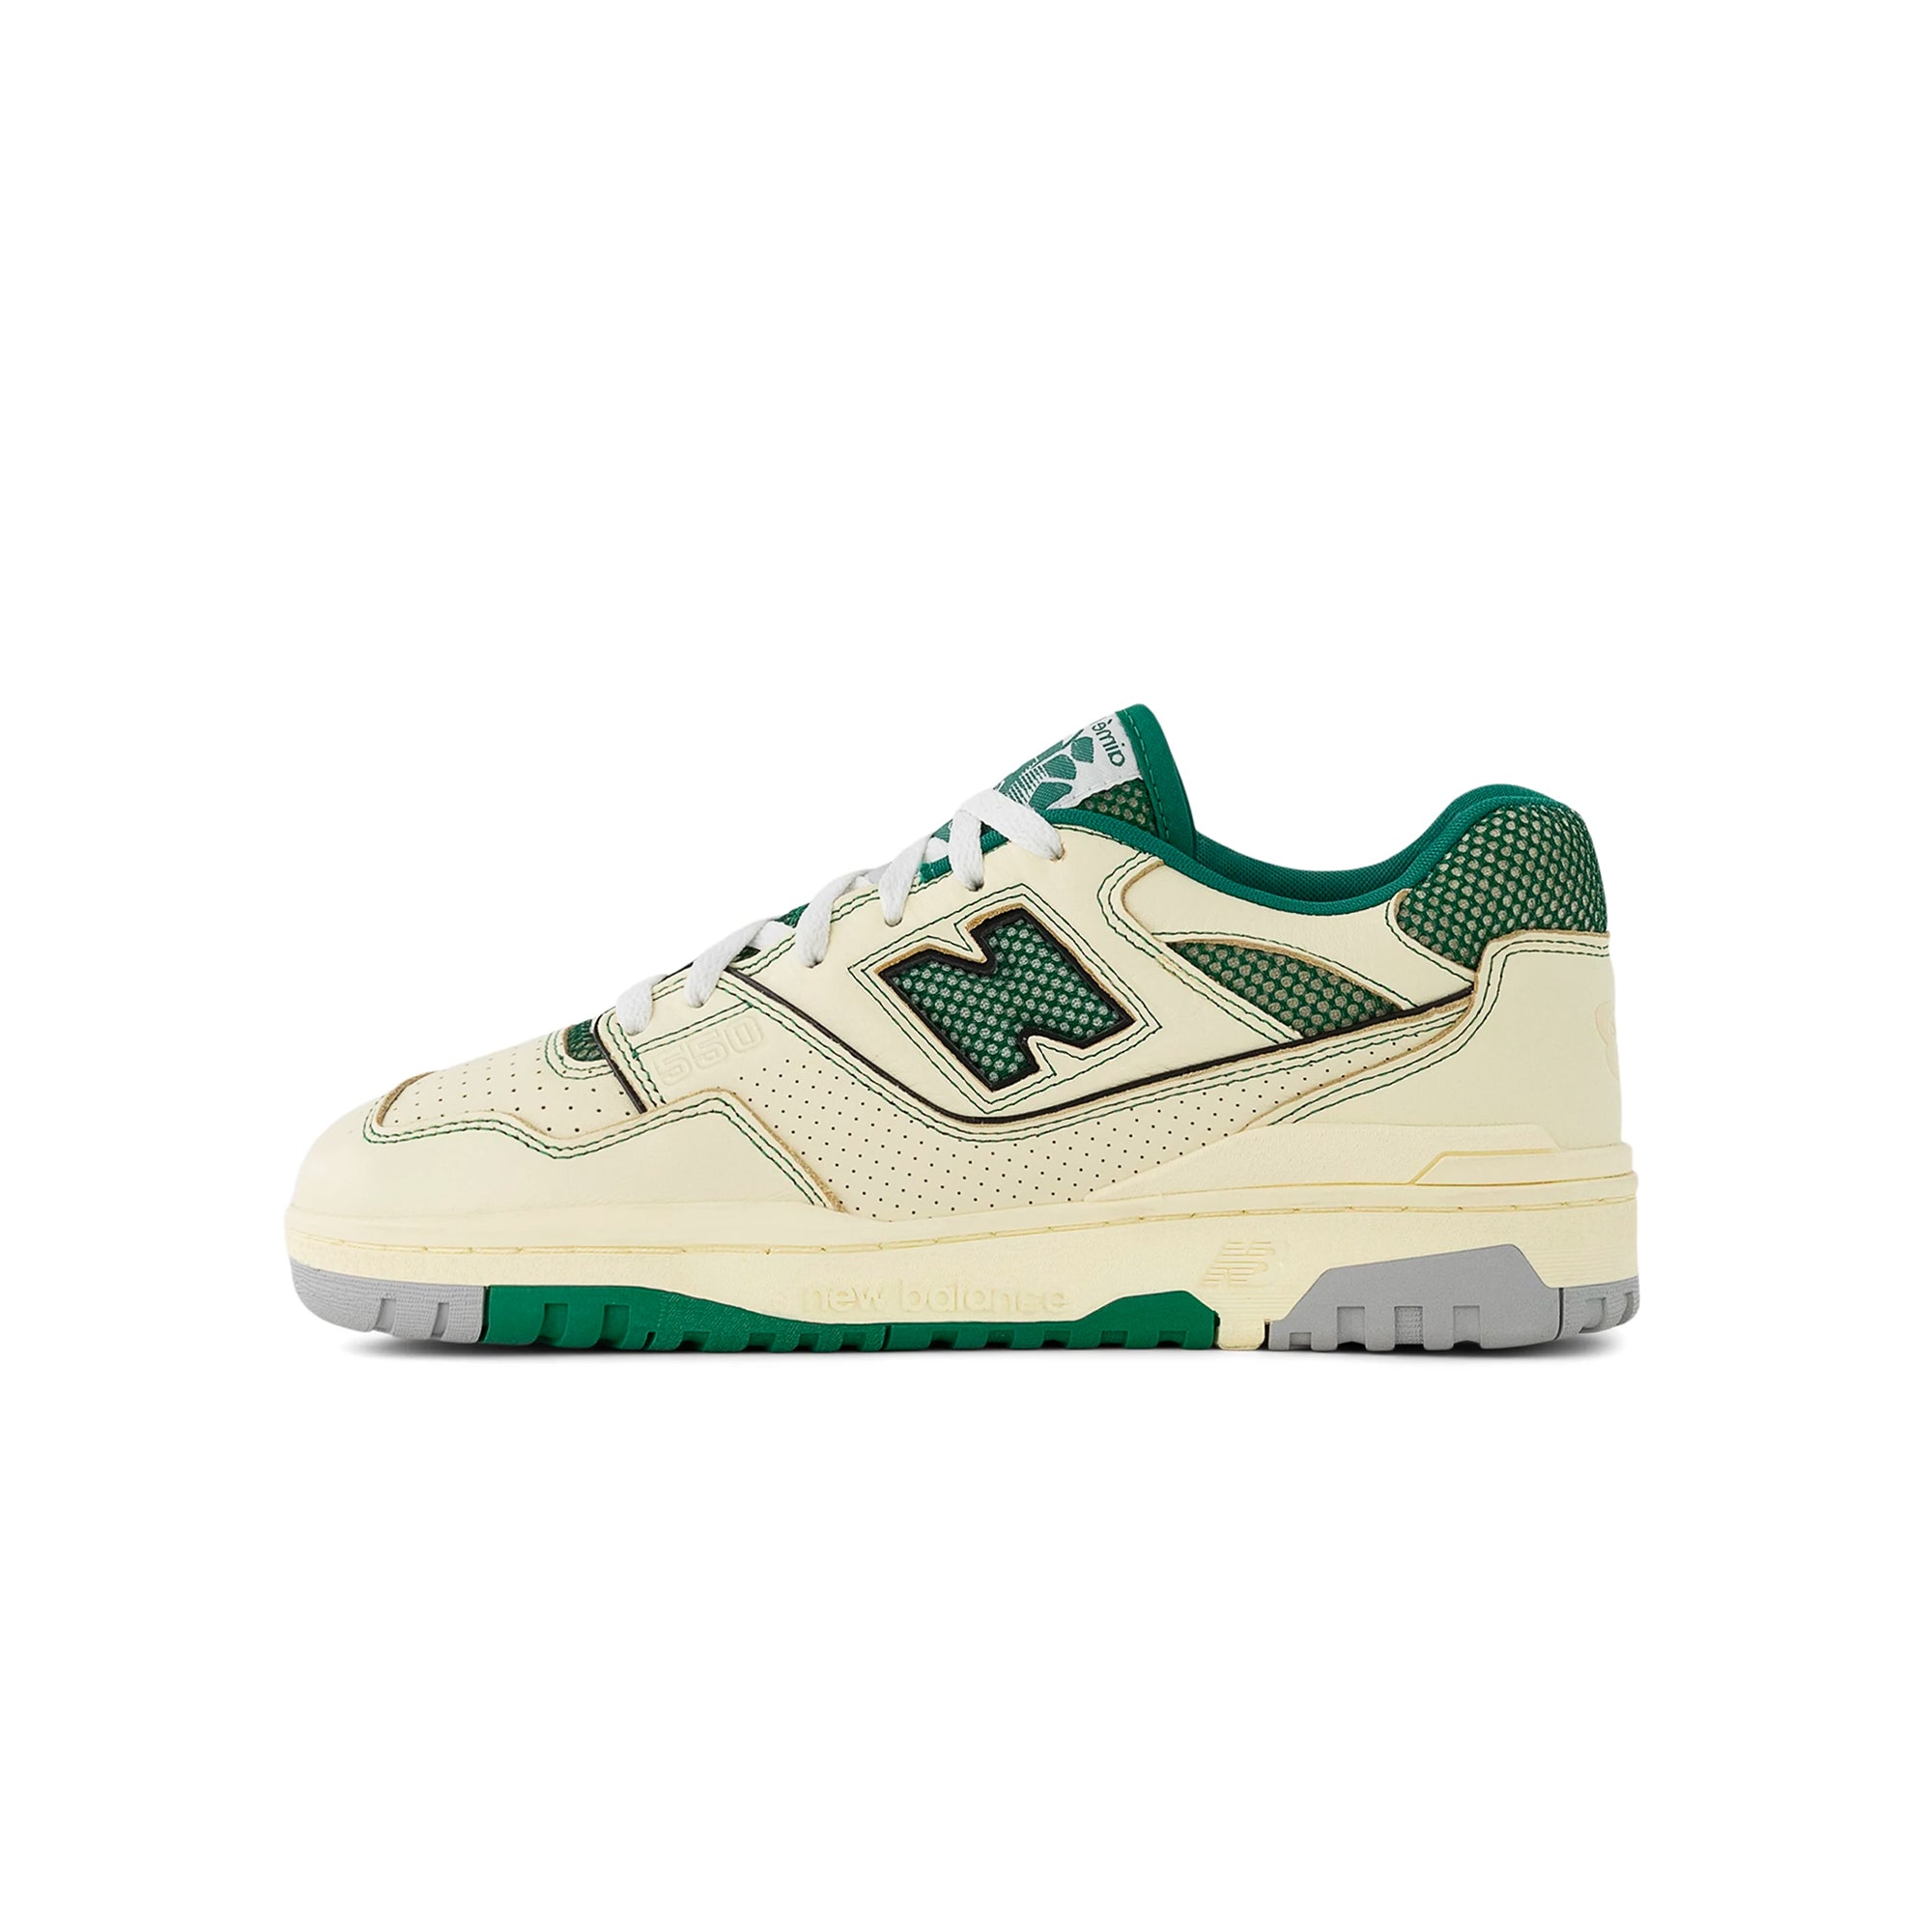 New Balance x Aime Leon Dore Mens 550 Shoes – Extra Butter